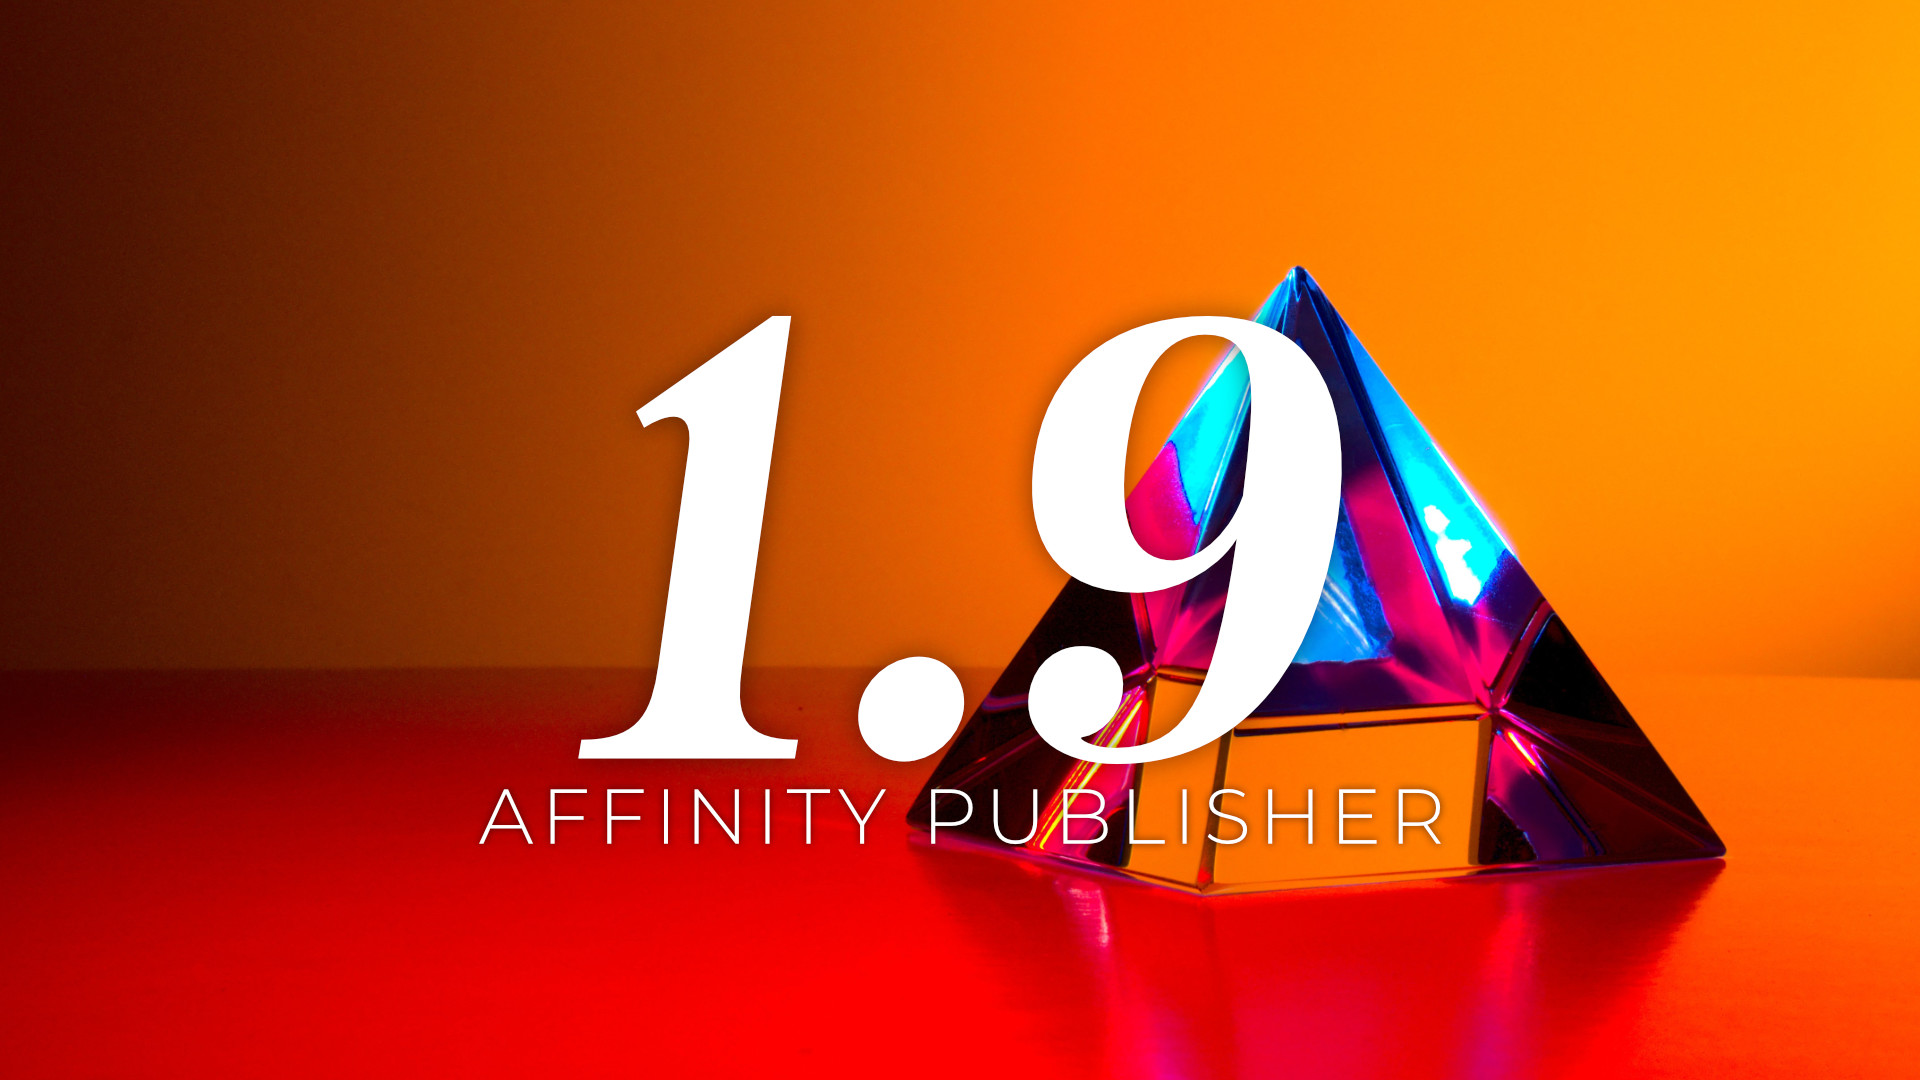 has the affinity publisher been released